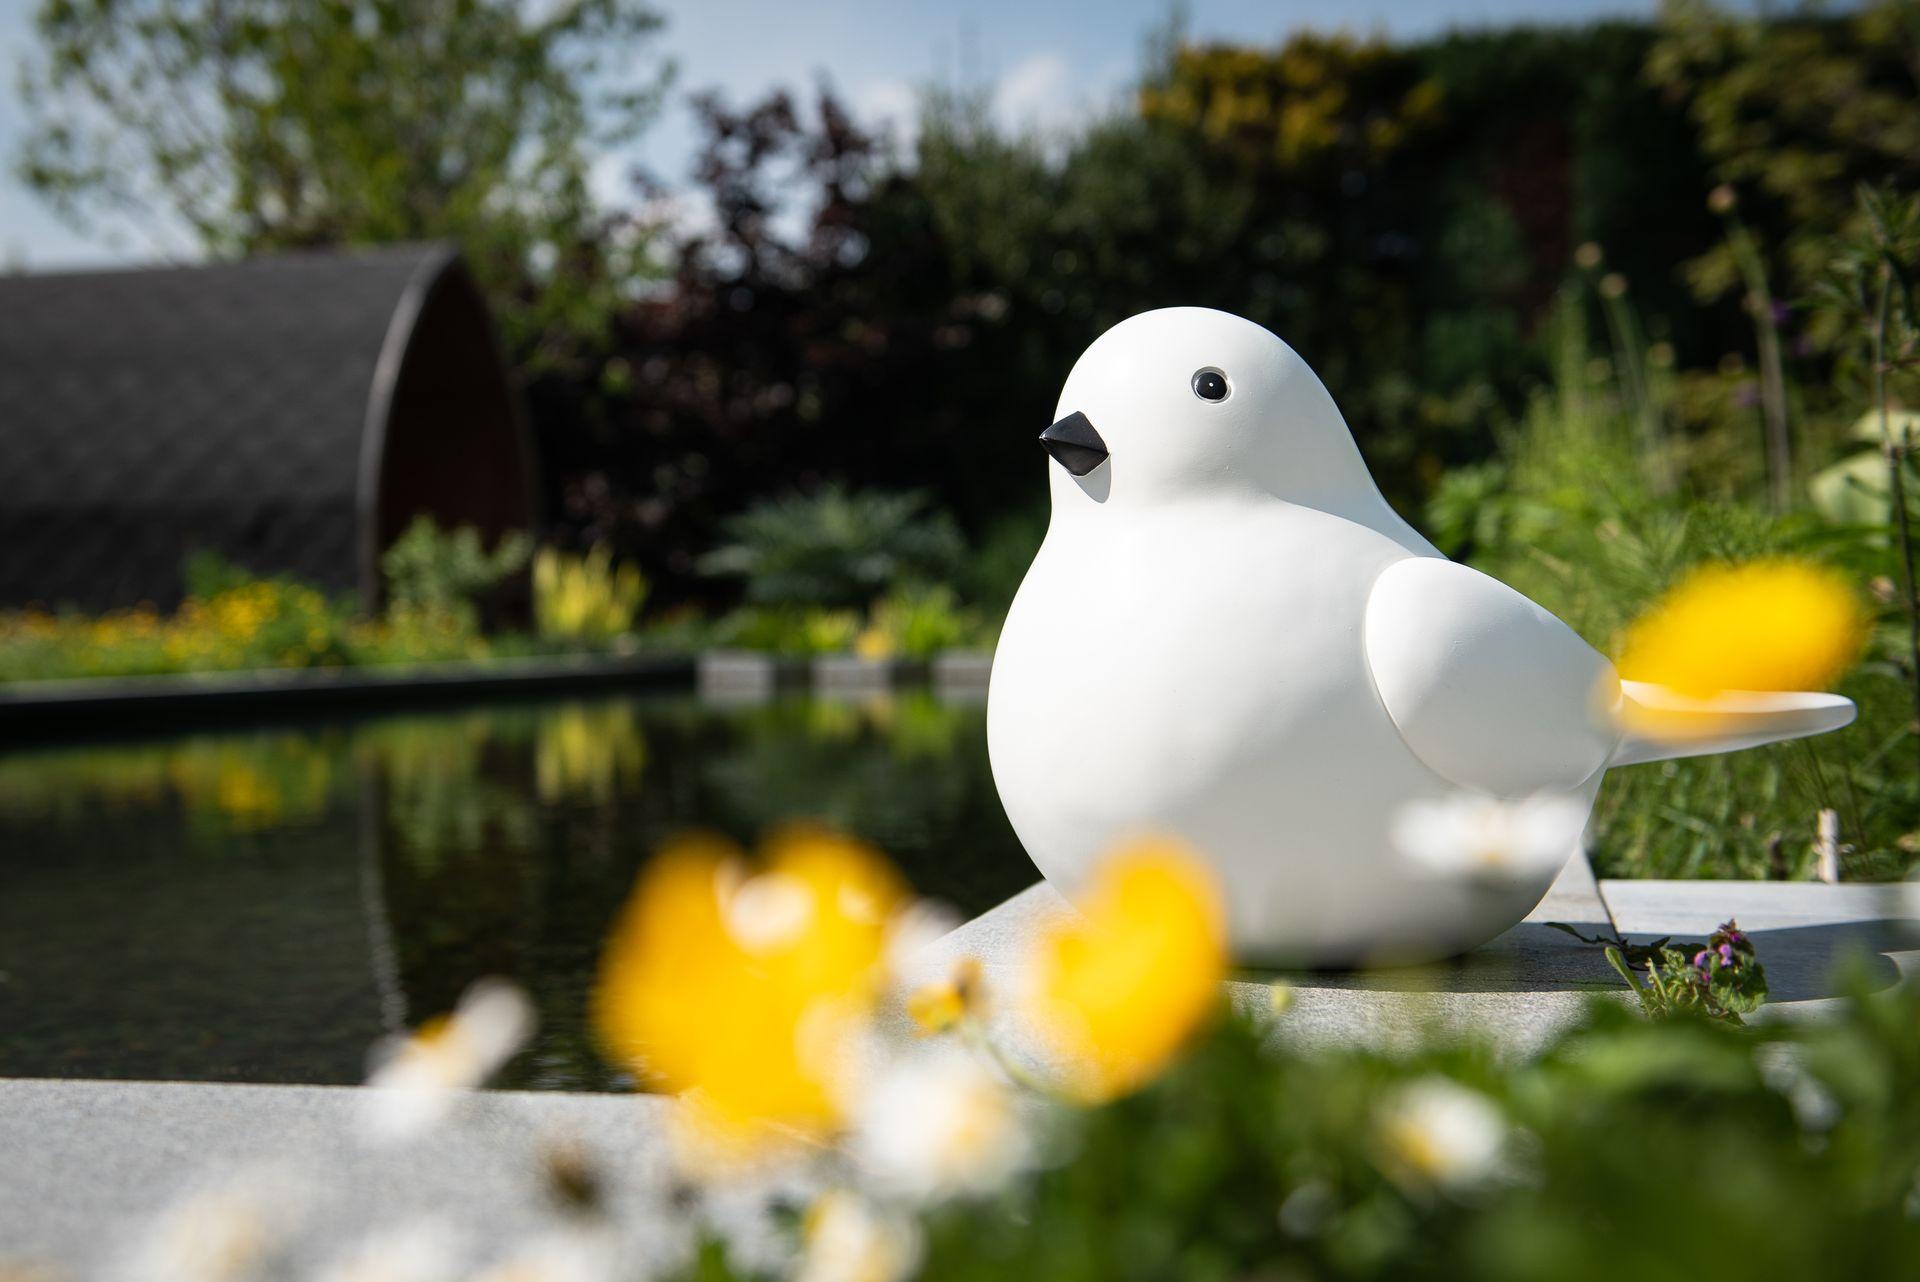 Statues of a modern white and black bird on a concrete slab next to a pond Garden ID